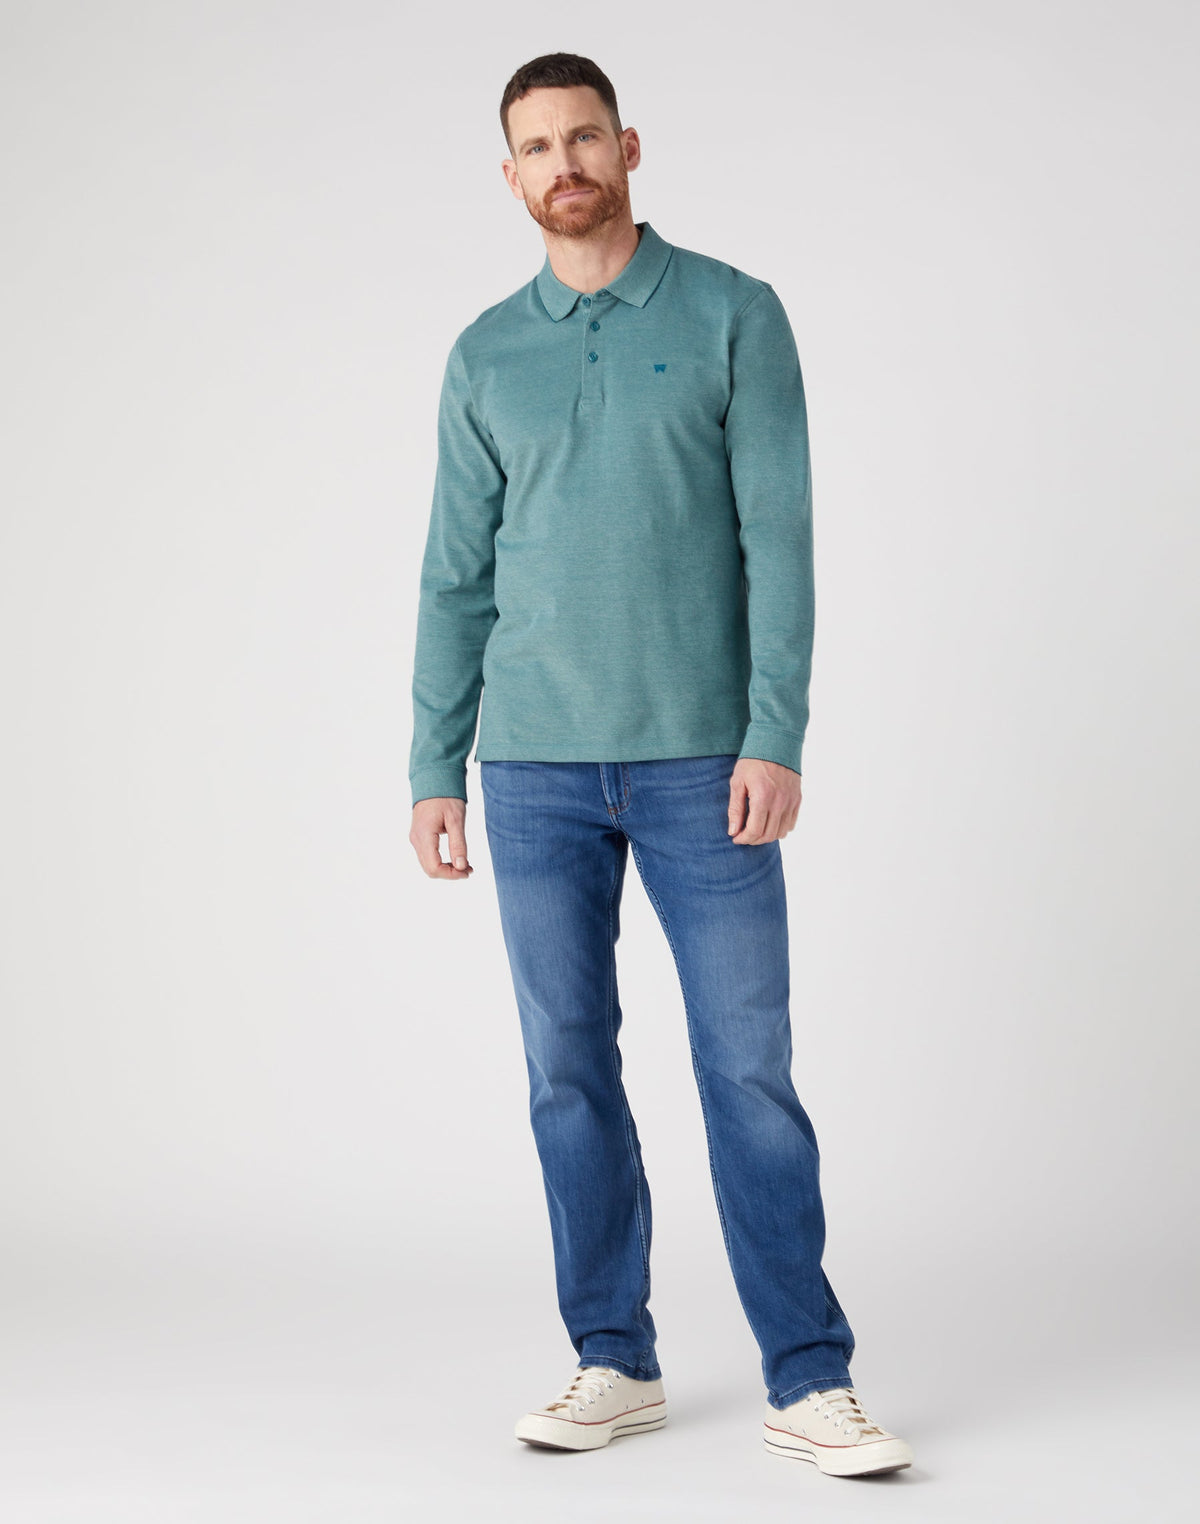 LS Refined Polo in Deep Teal Green